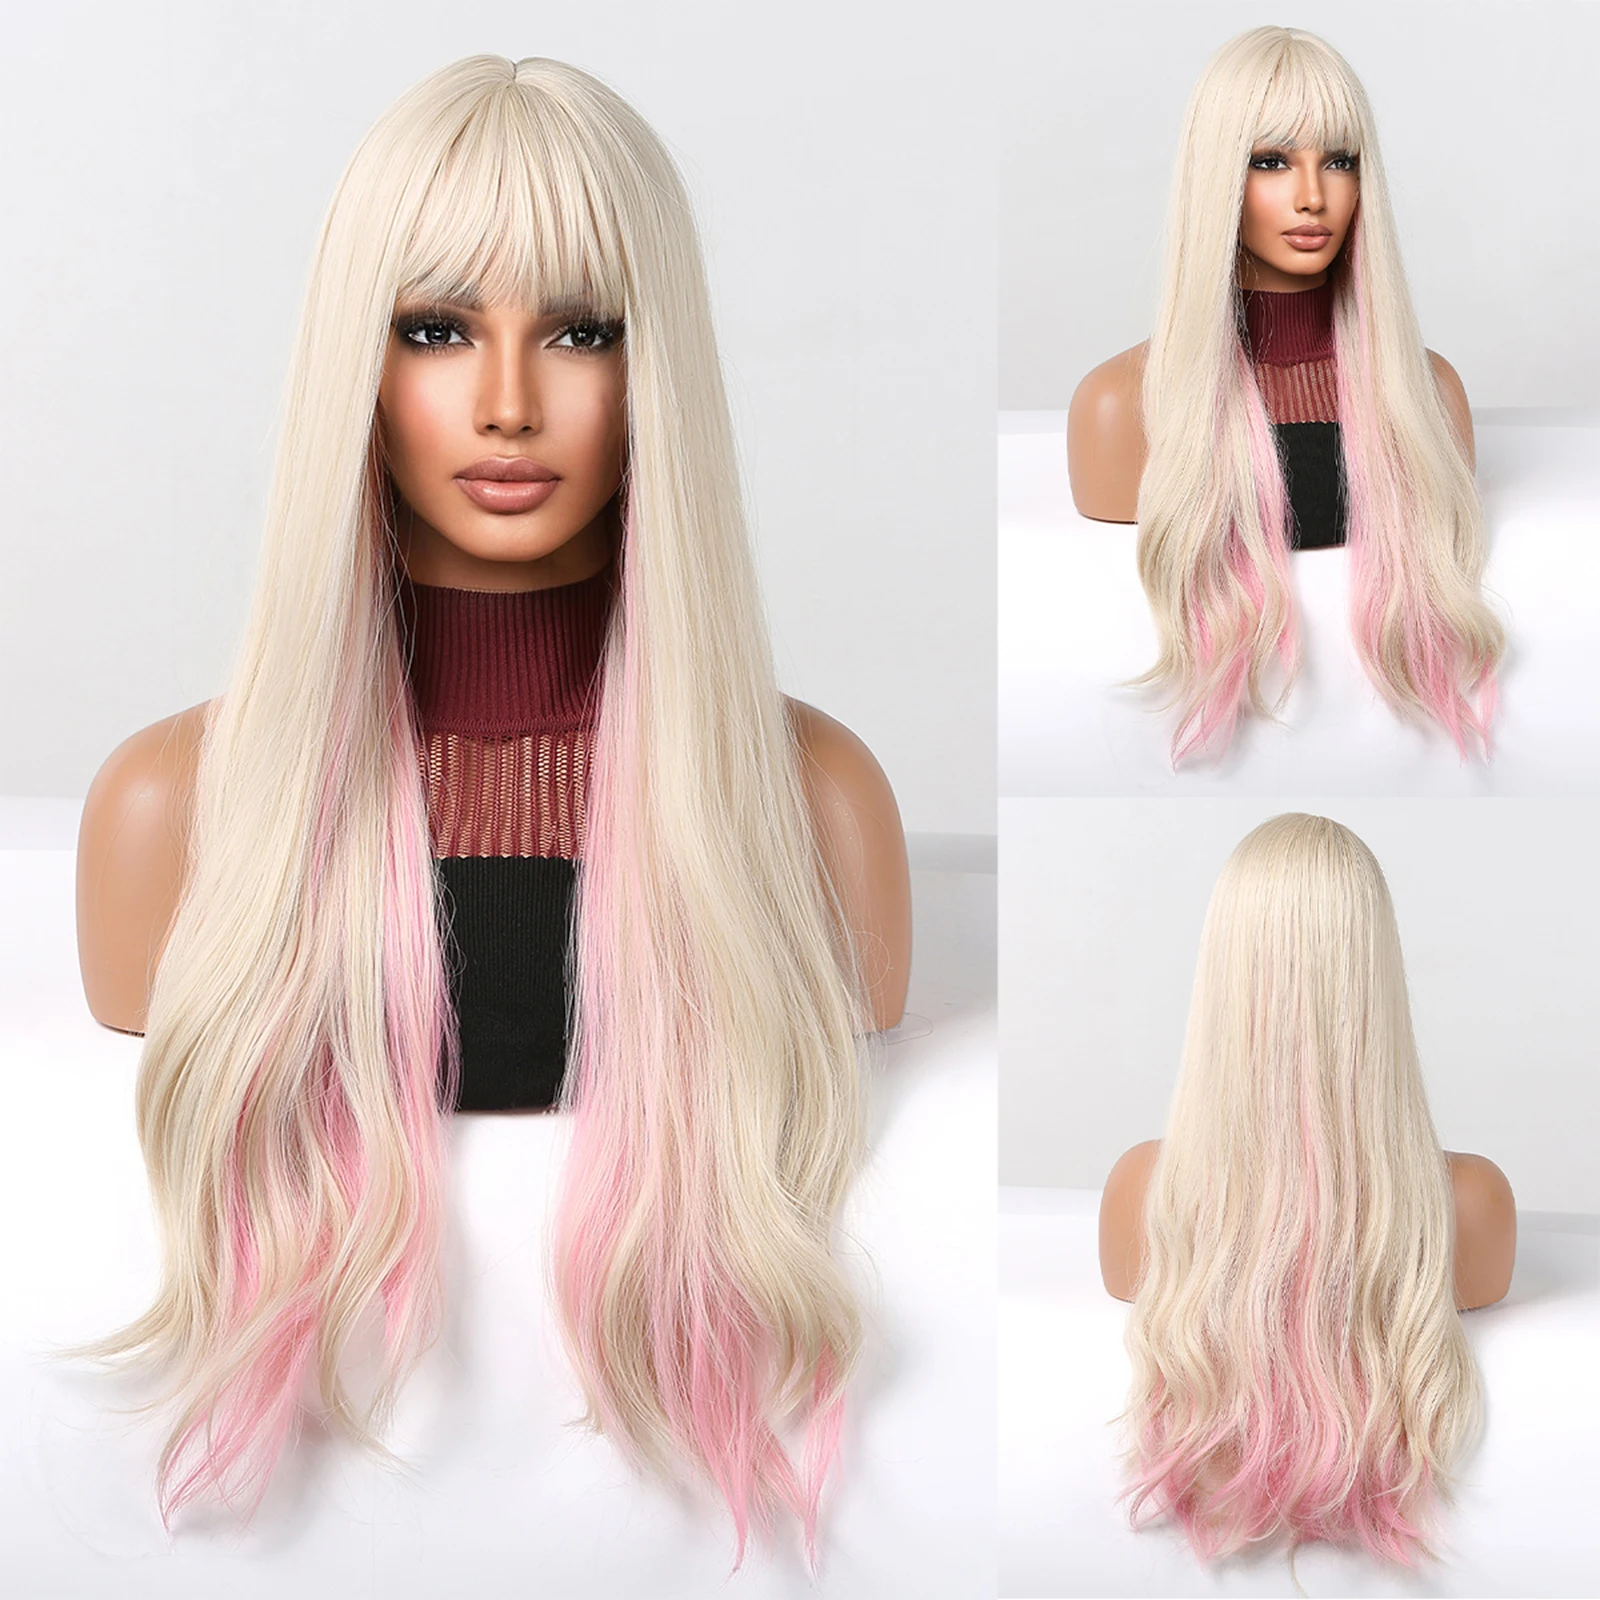 EASIHAIR Long Light Blonde Cosplay Lolita Synthetic Wigs with Bangs for Women Natural Wave Mixed Pink Wig Party Heat Resistant